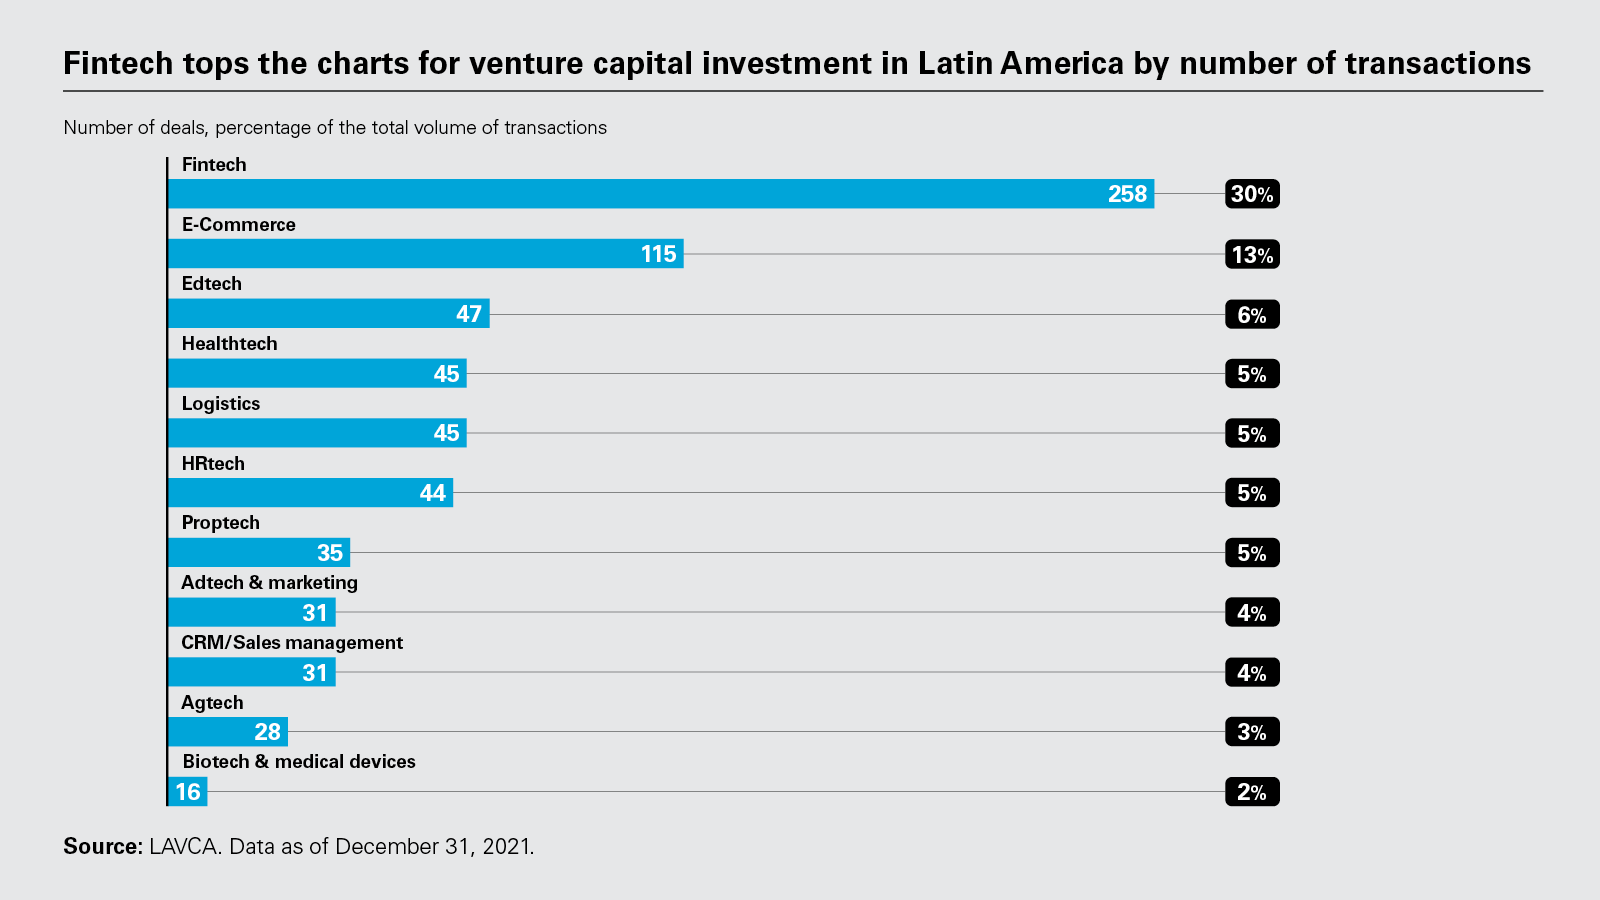 Fintech tops the charts for venture capital investment in Latin America by number of transactions